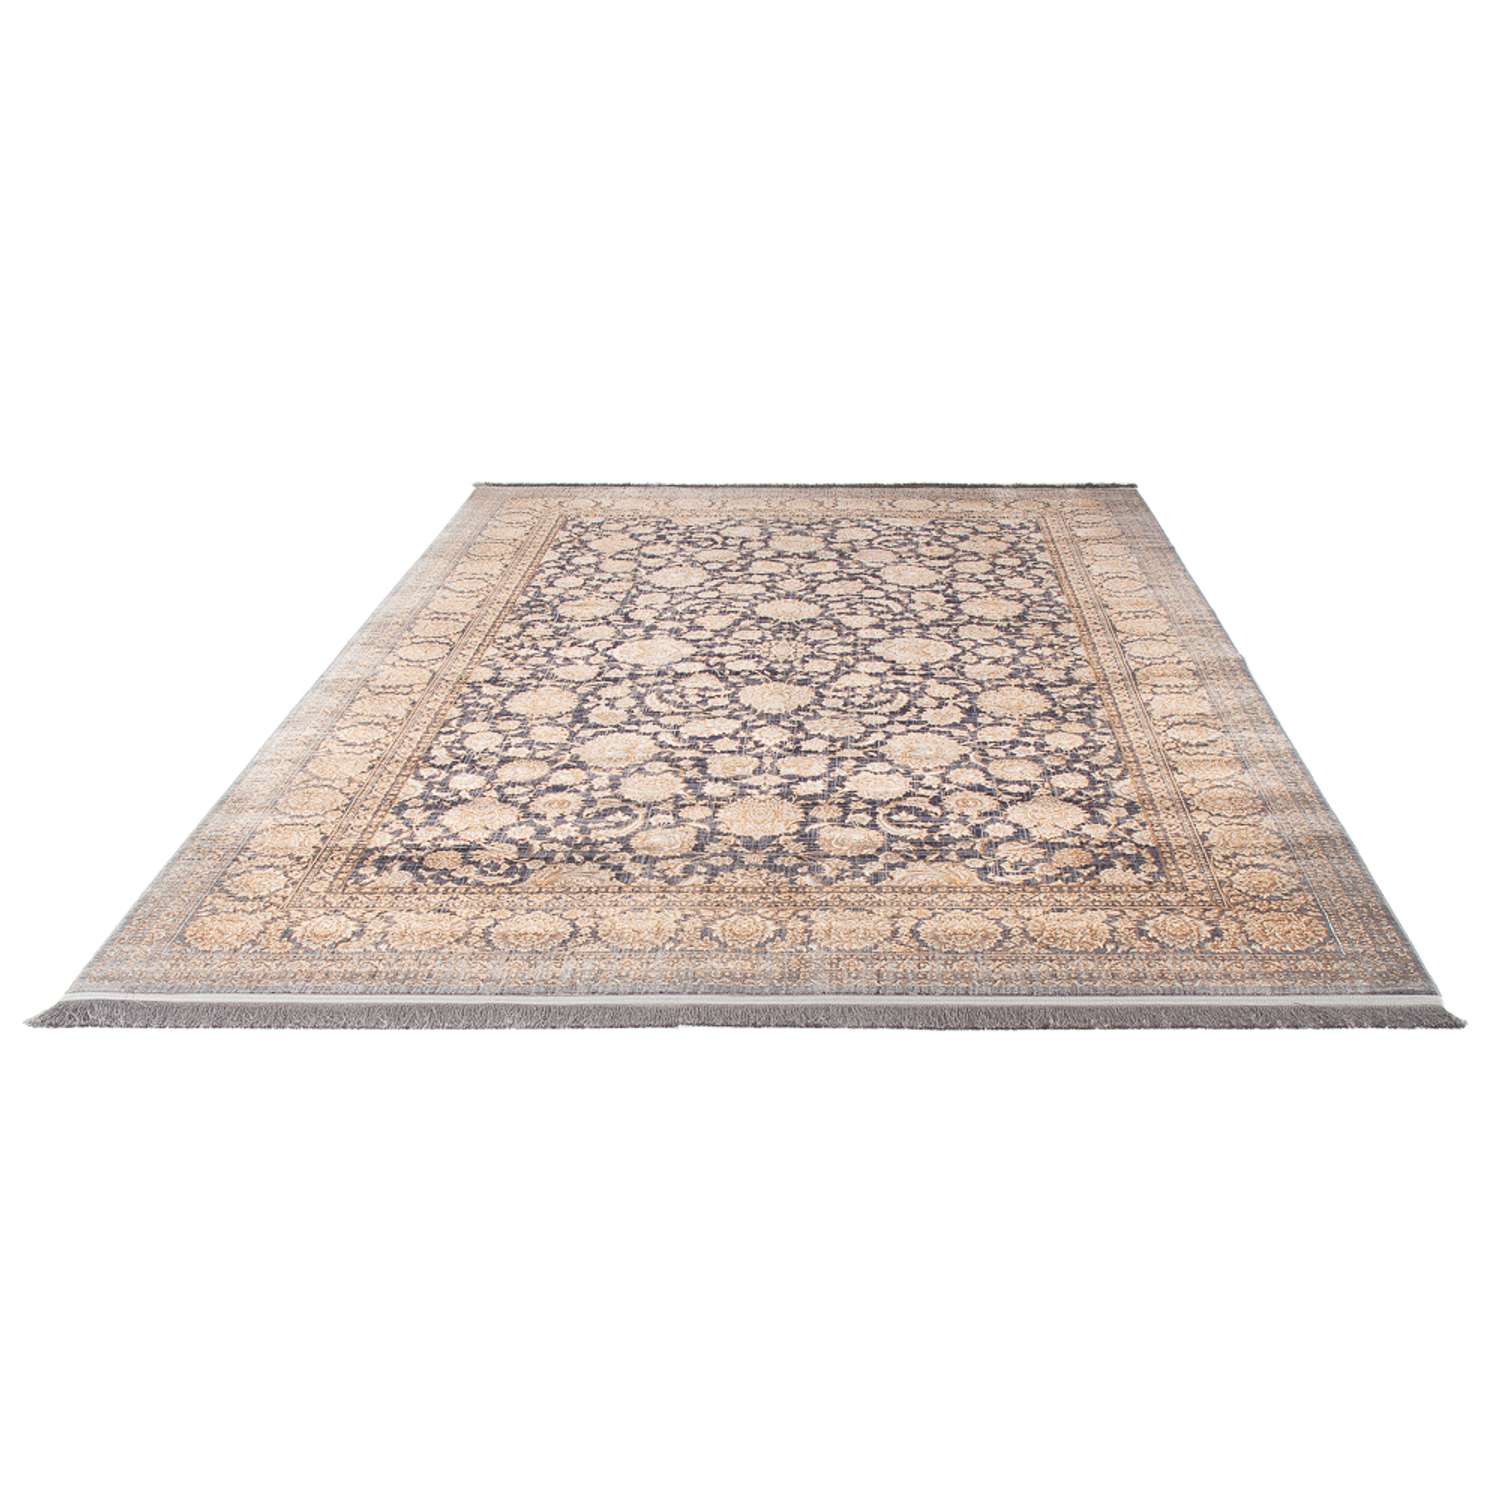 Oriental Woven Rug - Nomad's Oasis - rectangle